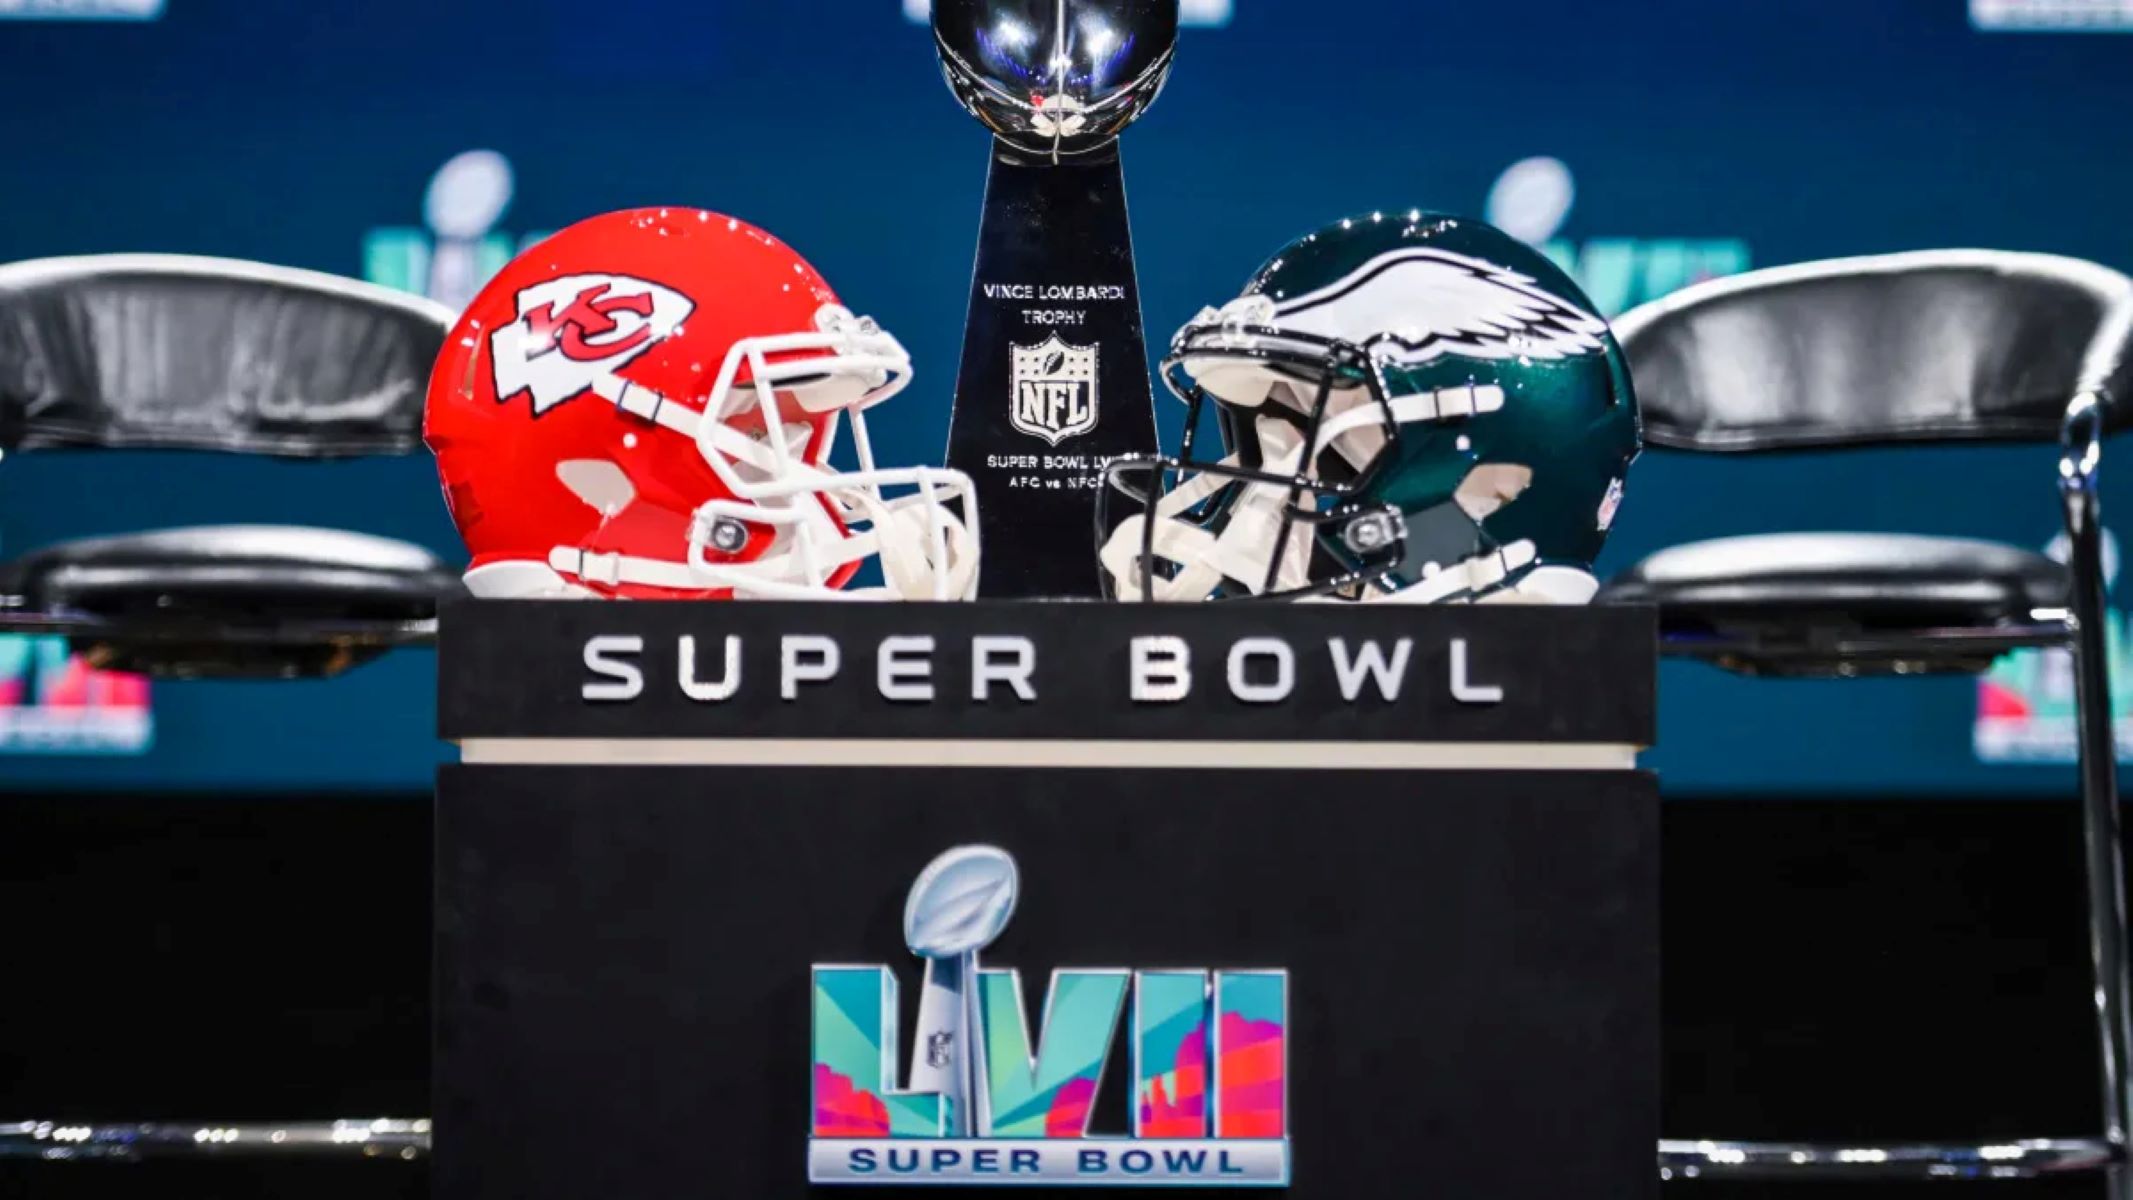 How To Watch The Super Bowl On The Internet